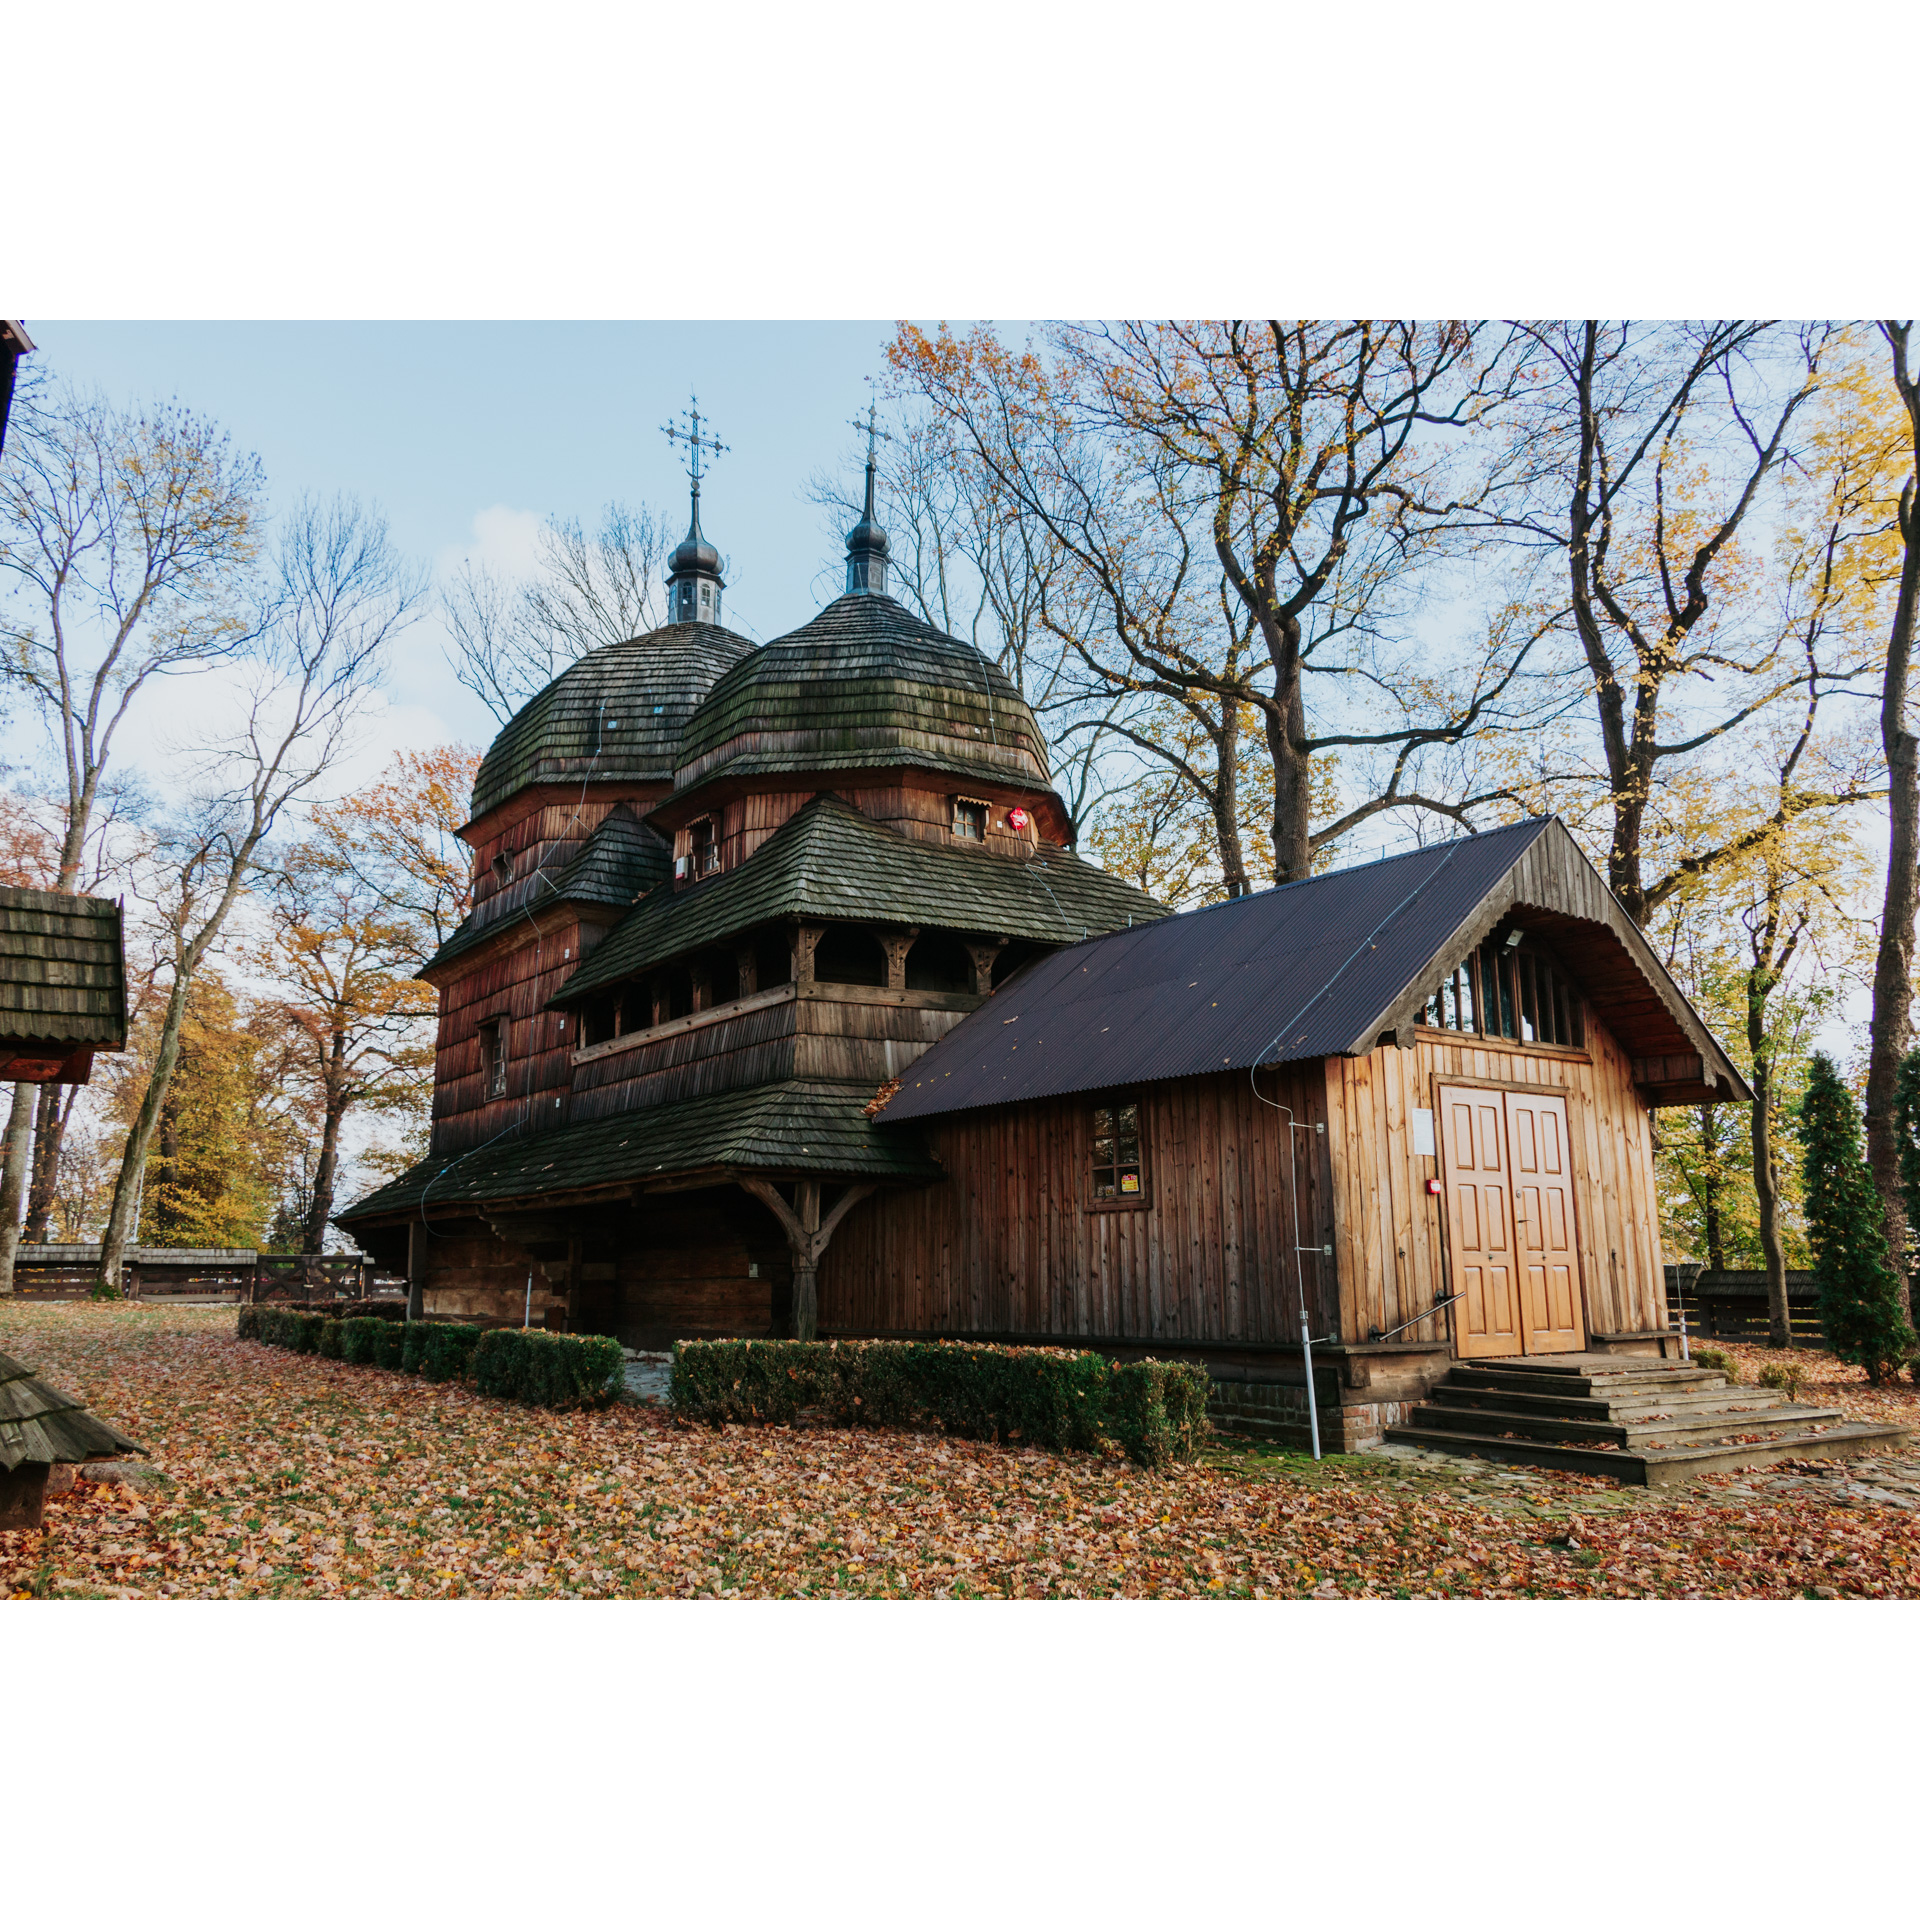 A wooden Orthodox church with domes and an added entrance to the temple against the background of trees